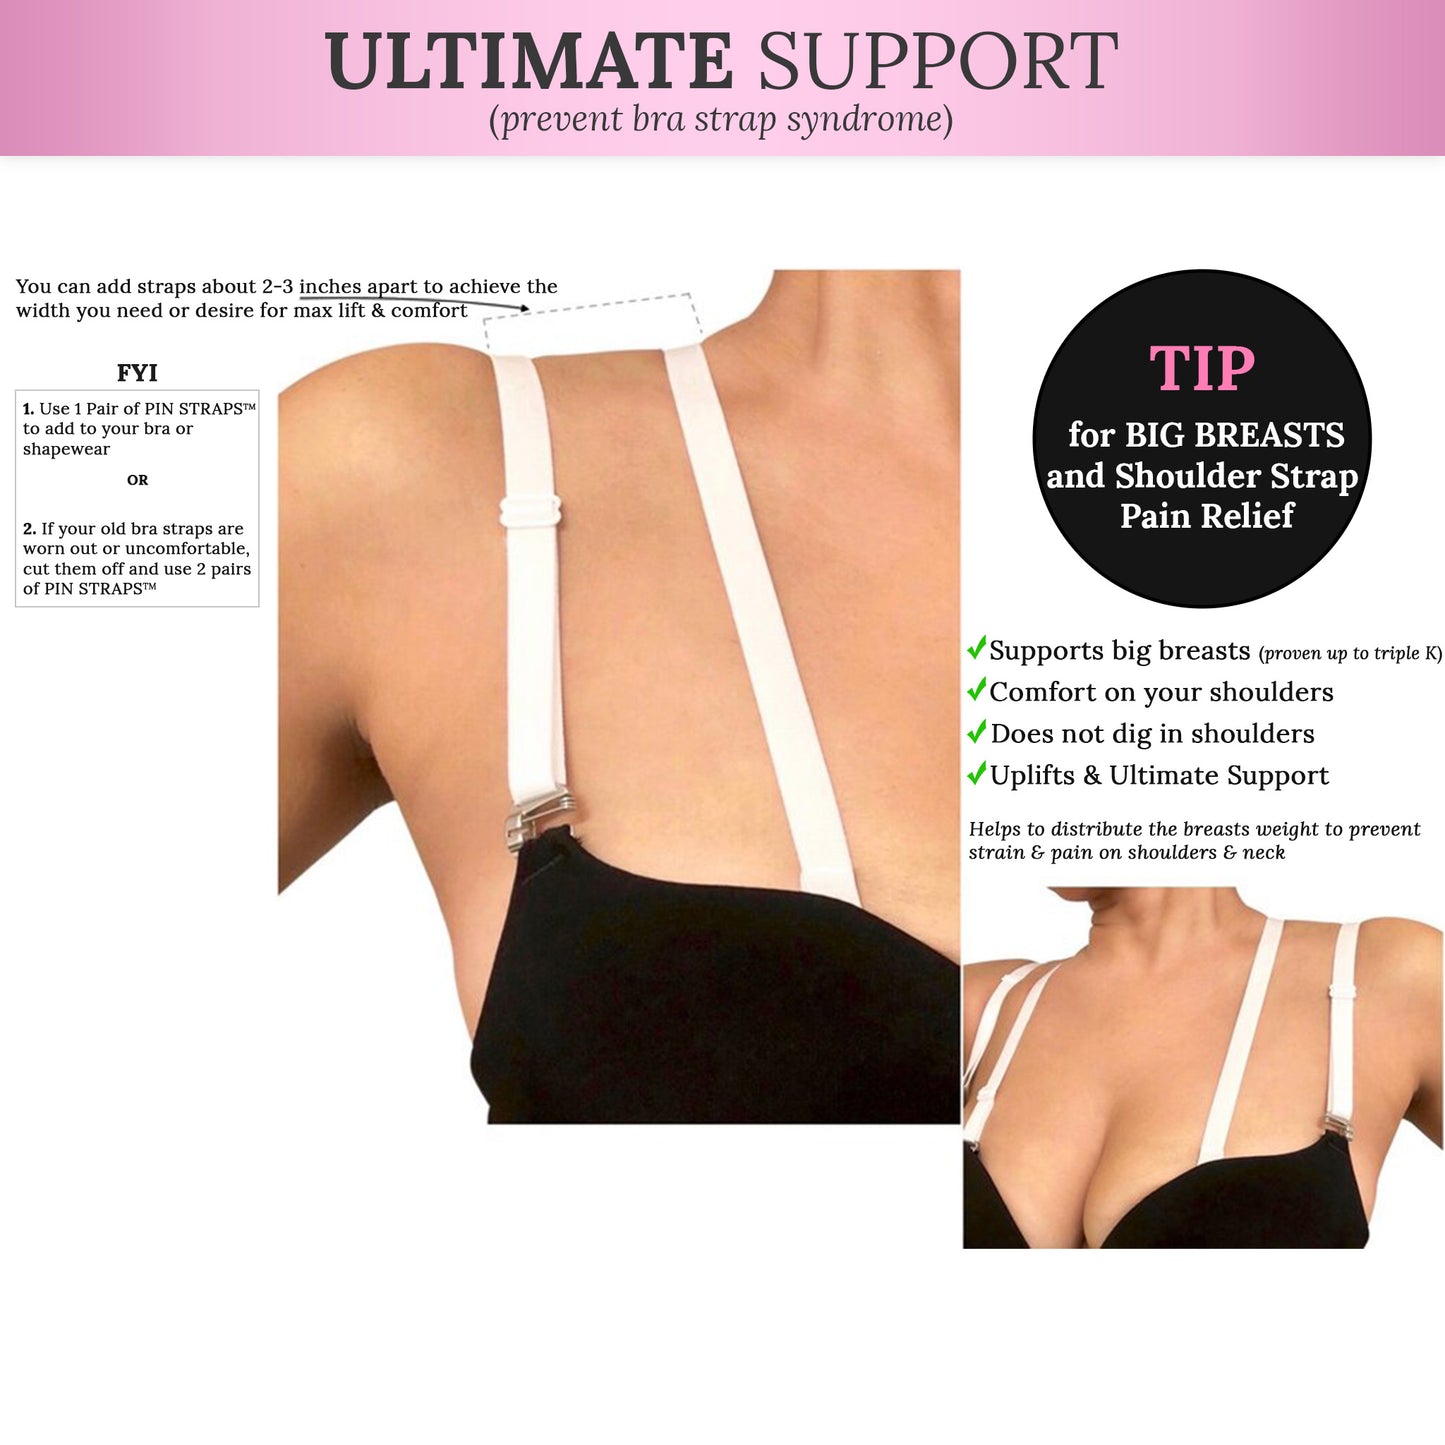 Replacement Bra Straps (White) for Bras, Swimsuits, Dresses